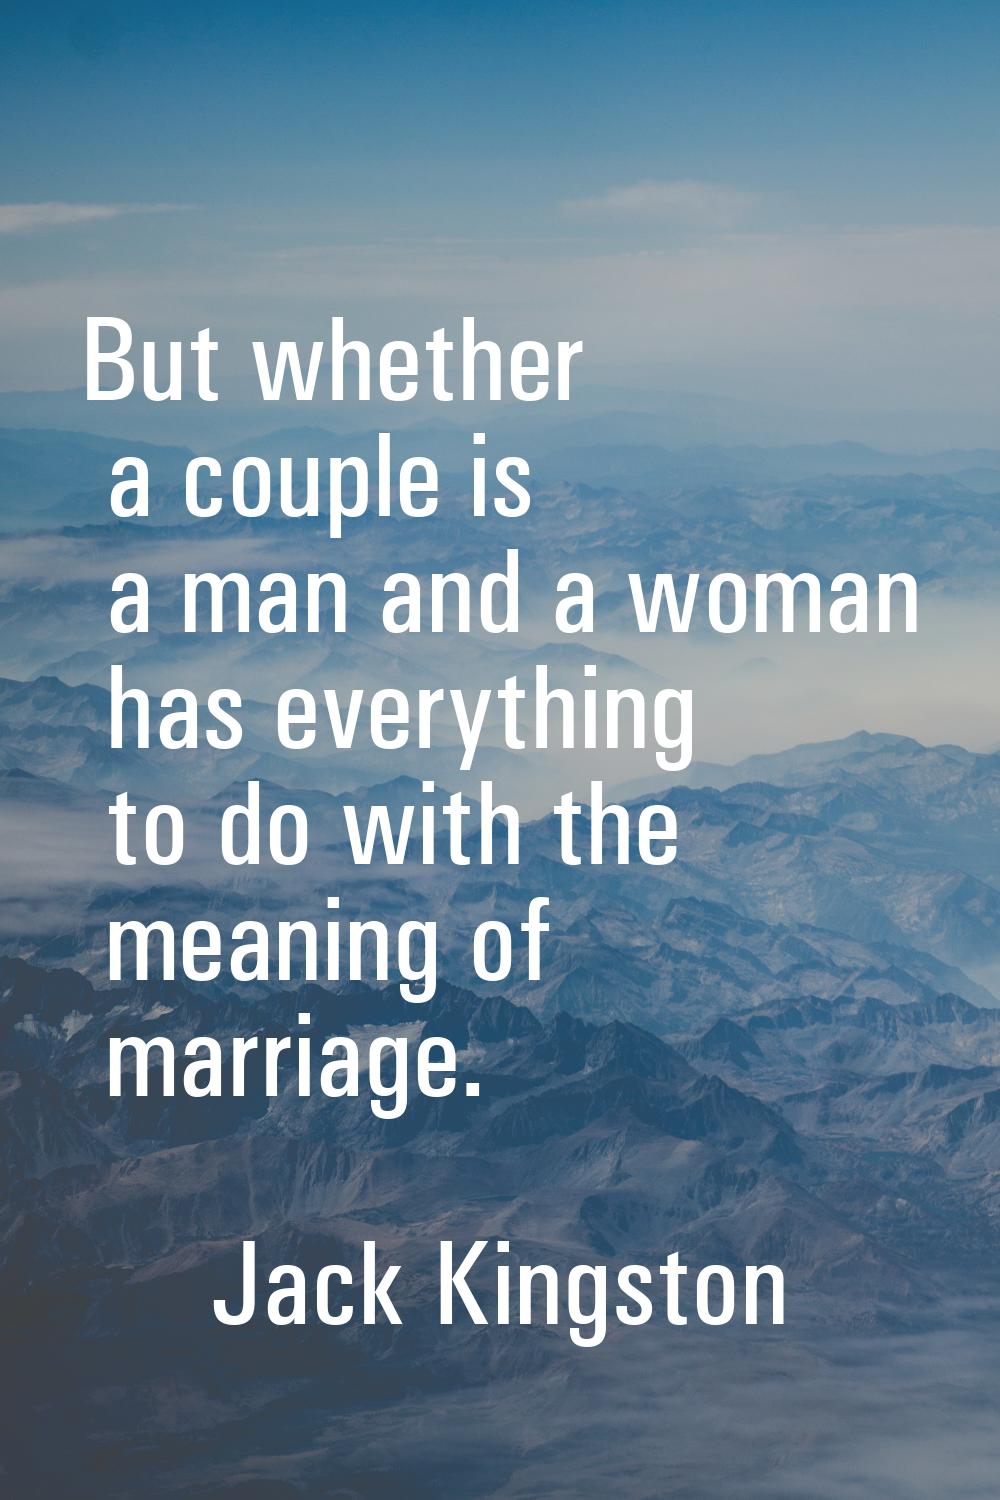 But whether a couple is a man and a woman has everything to do with the meaning of marriage.